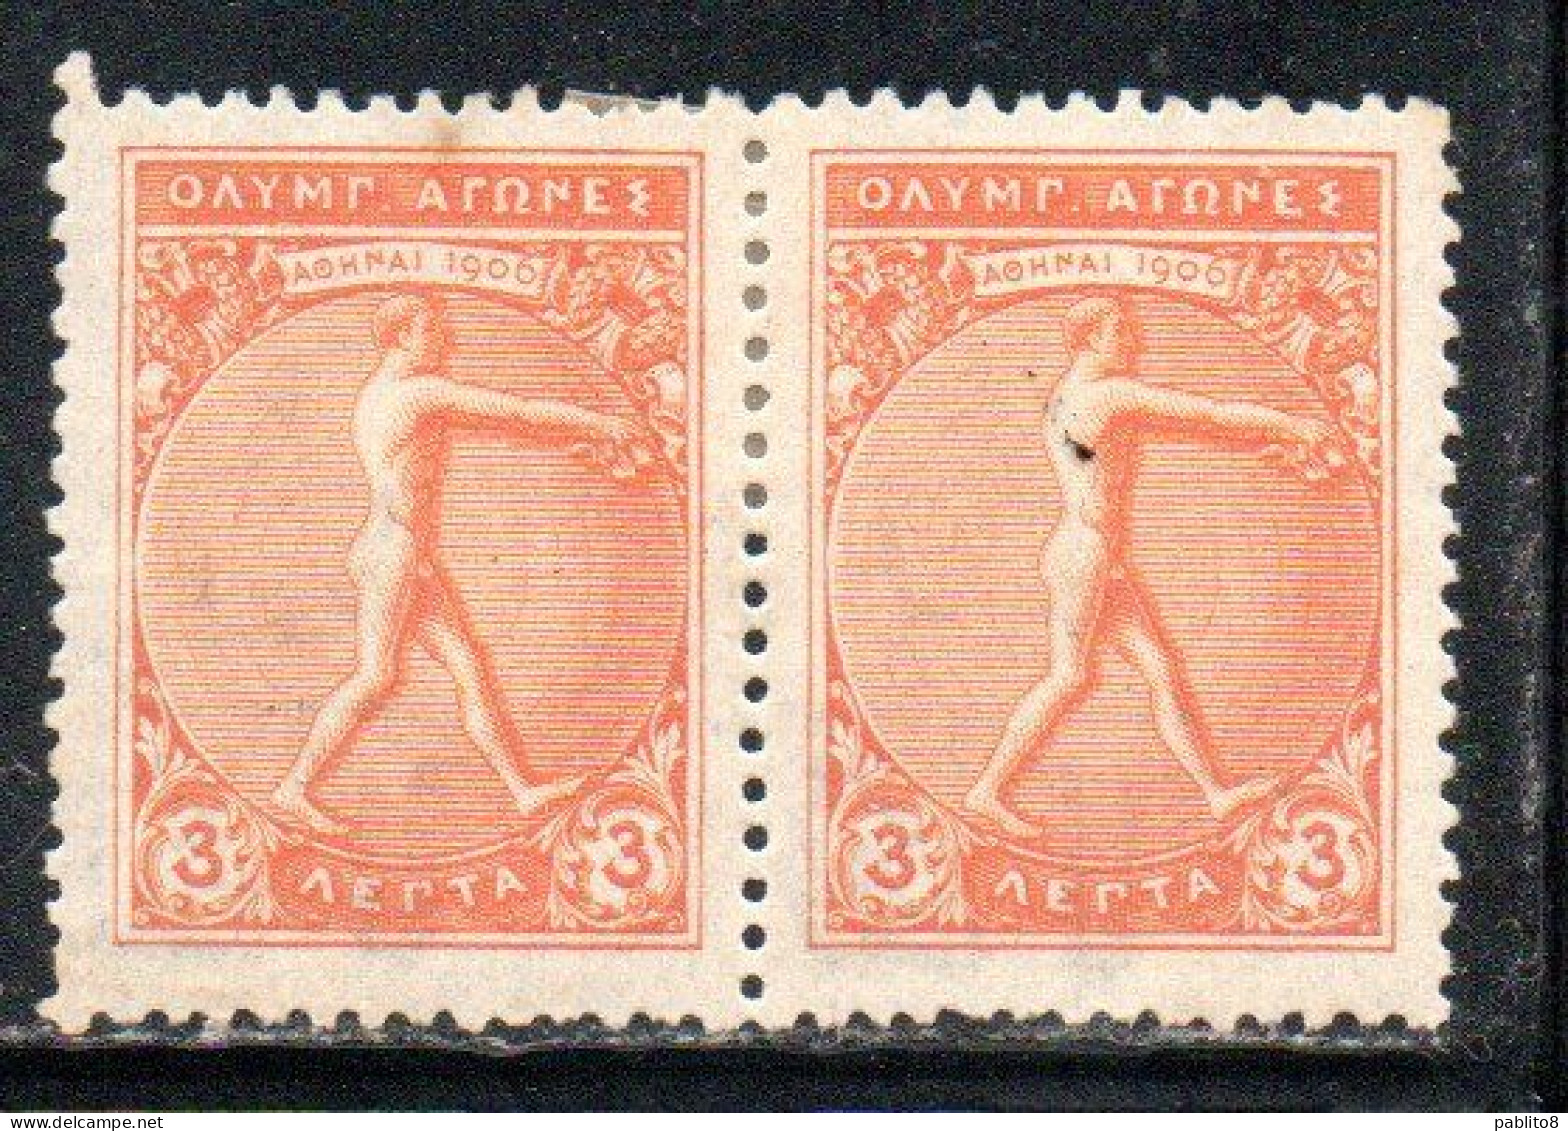 GREECE GRECIA ELLAS 1906 GREEK SPECIAL OLYMPIC GAMES ATHENS JUMPER WITH JUMPING WEIGHTS 3l MH - Unused Stamps